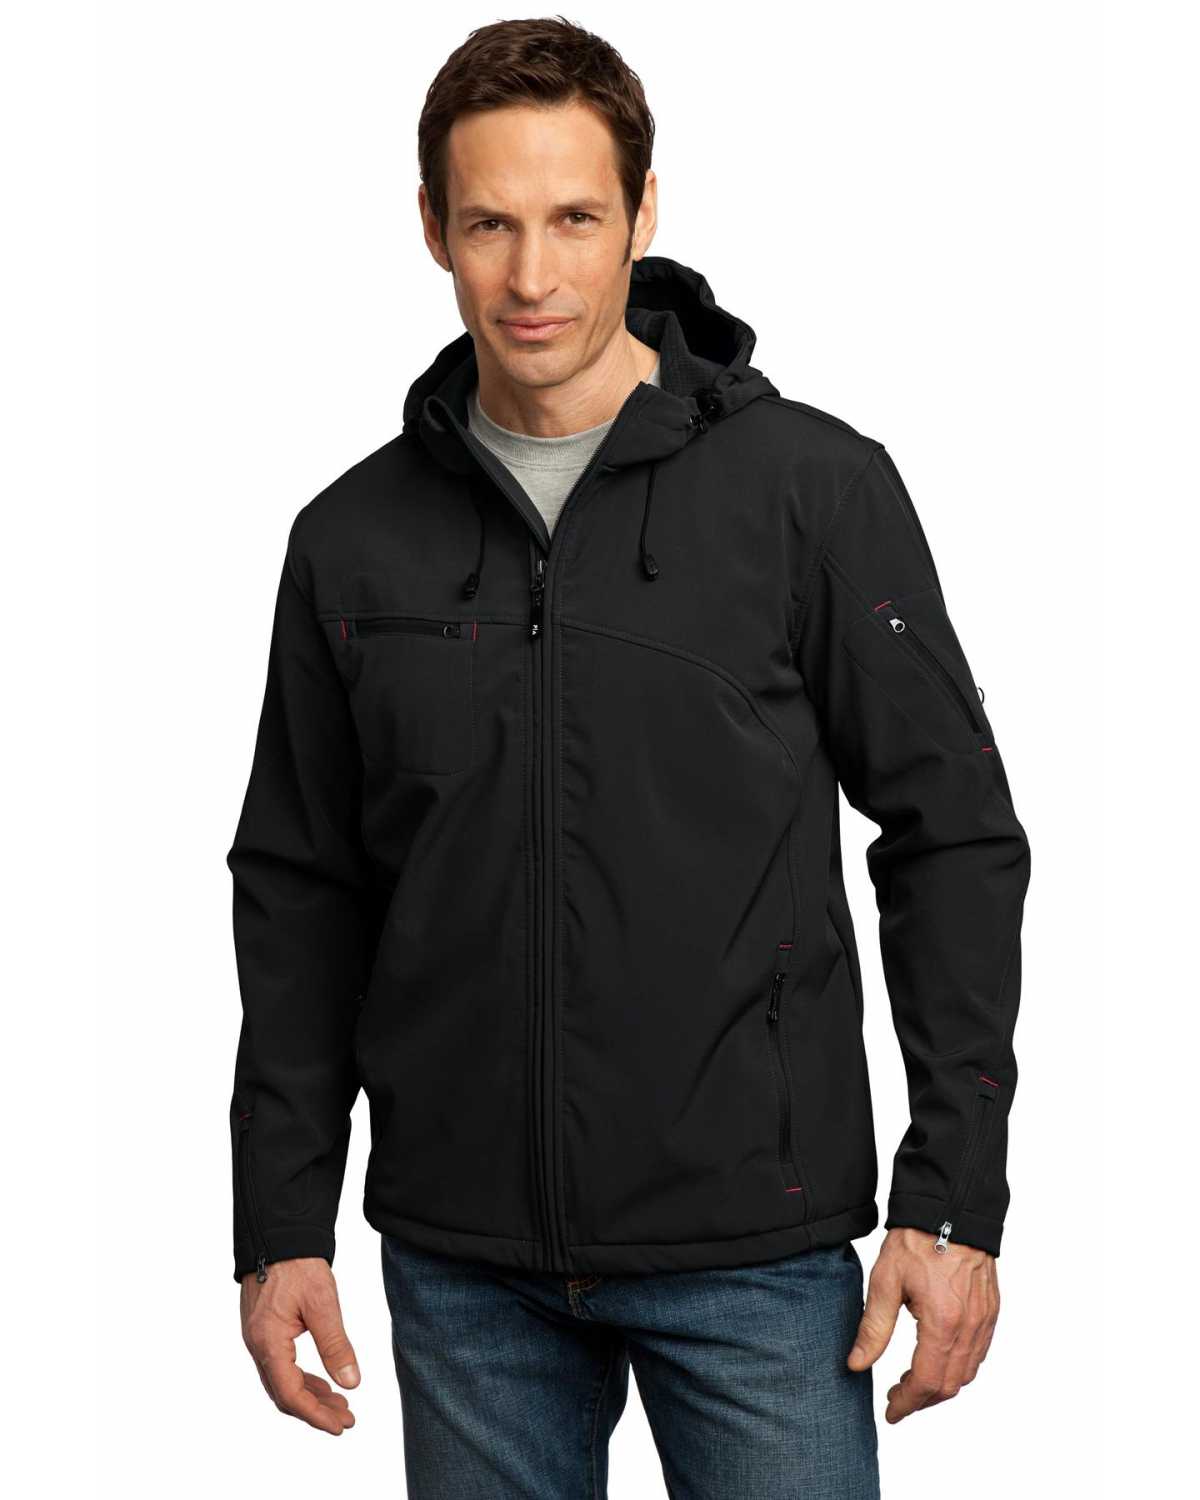 Port Authority J706 Textured Hooded Soft Shell Jacket on discount ...